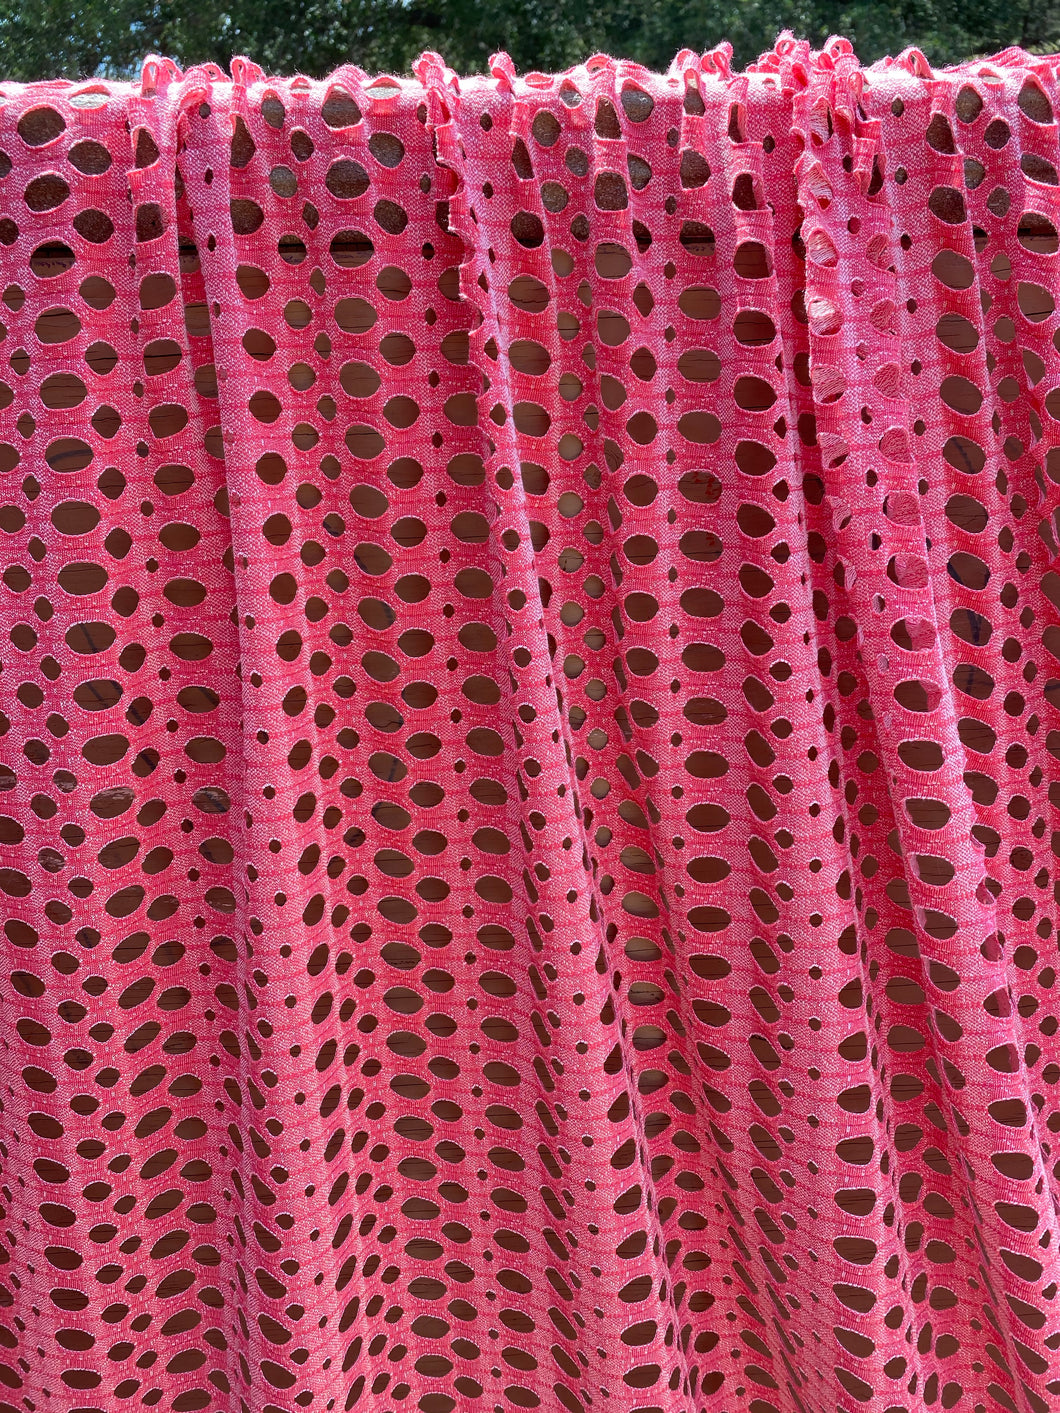 Pink Reverse FT distressed Netting